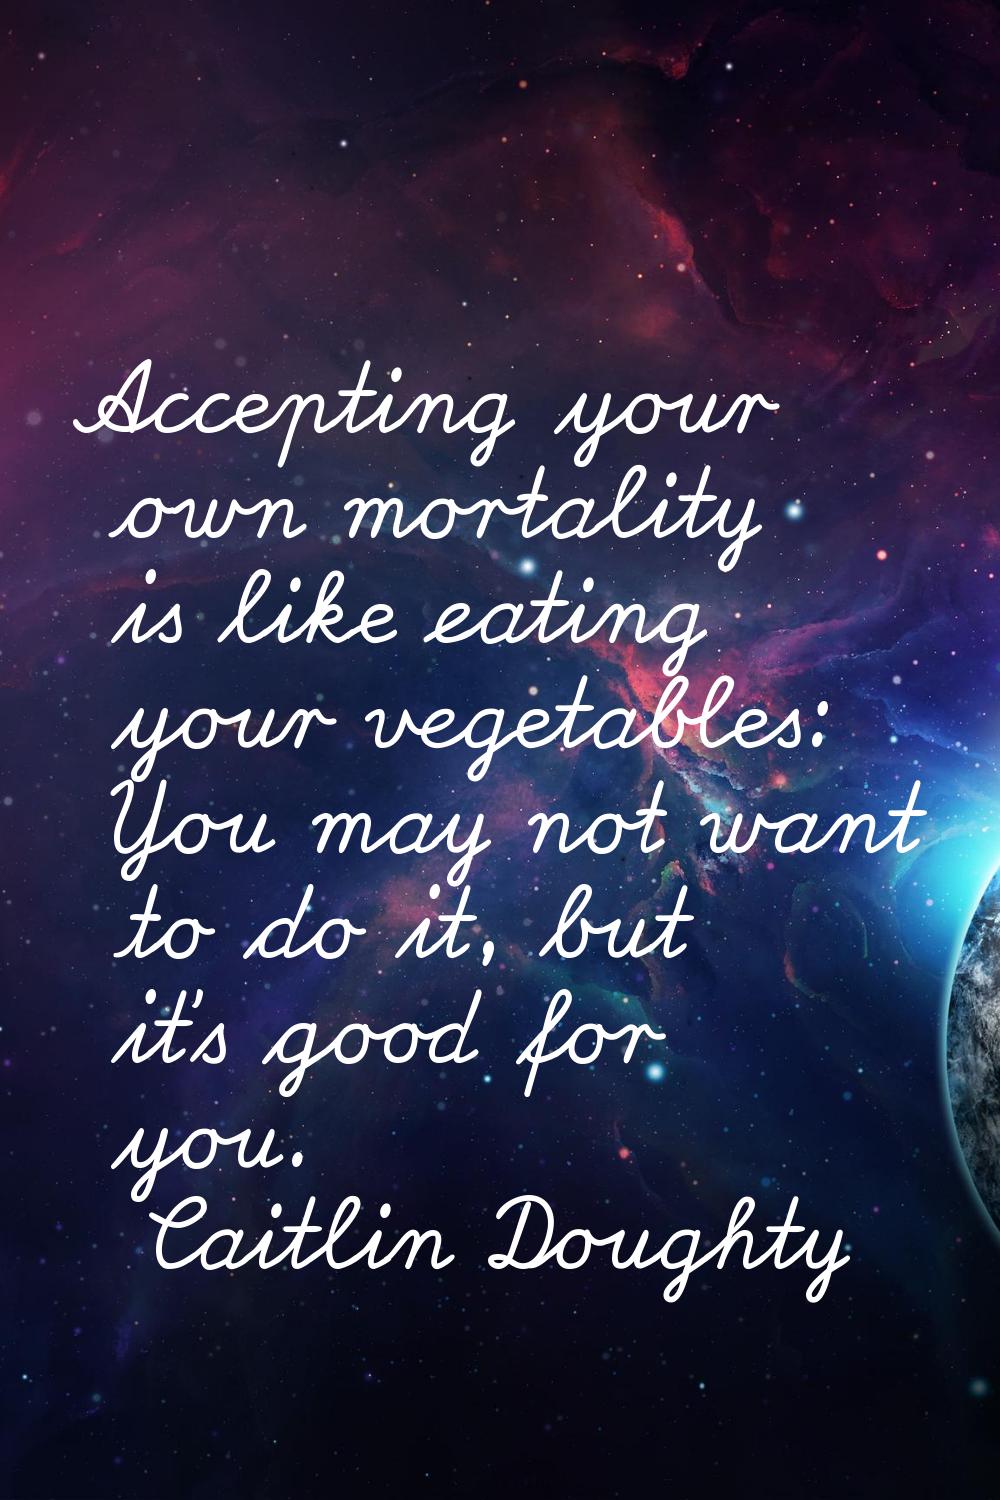 Accepting your own mortality is like eating your vegetables: You may not want to do it, but it's go